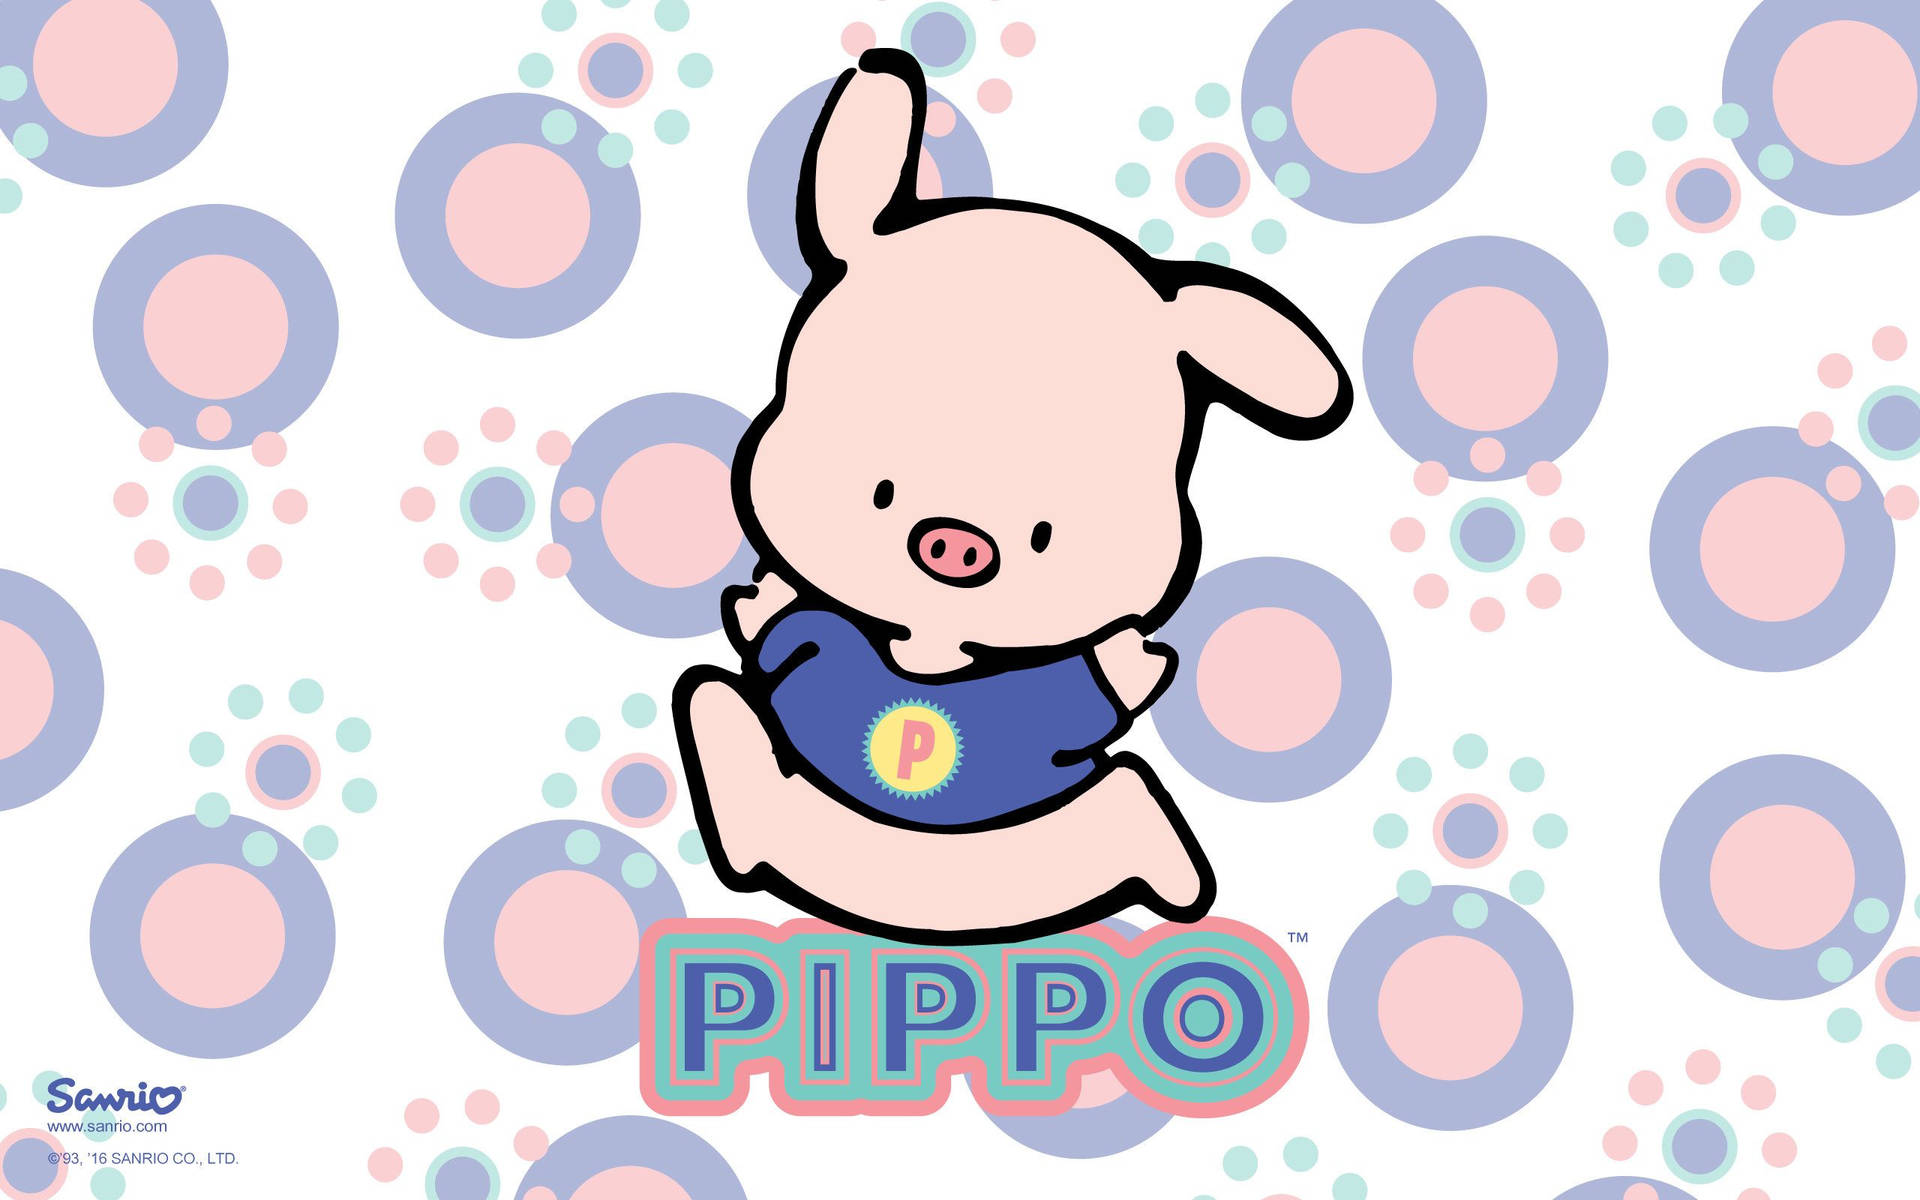 Celebrate Every Day with Cute Pippo from Sanrio! Wallpaper